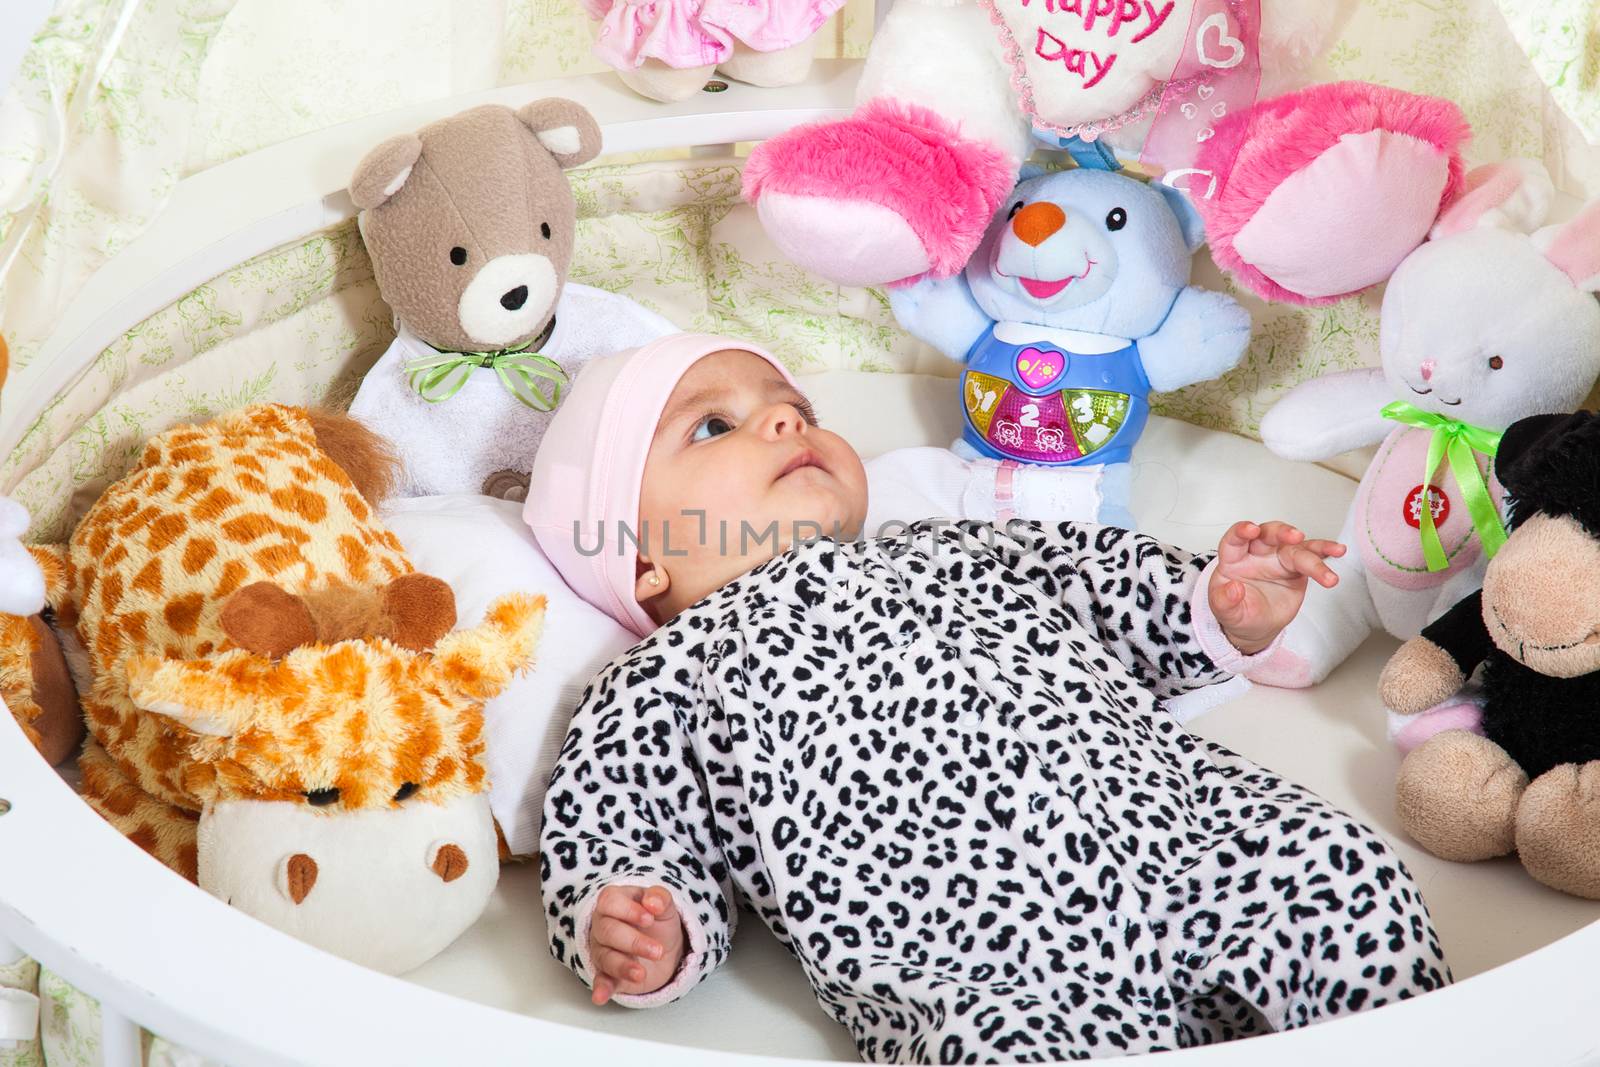 A baby girl dressed in animal print surrounded by stuffed animal by anamejia18